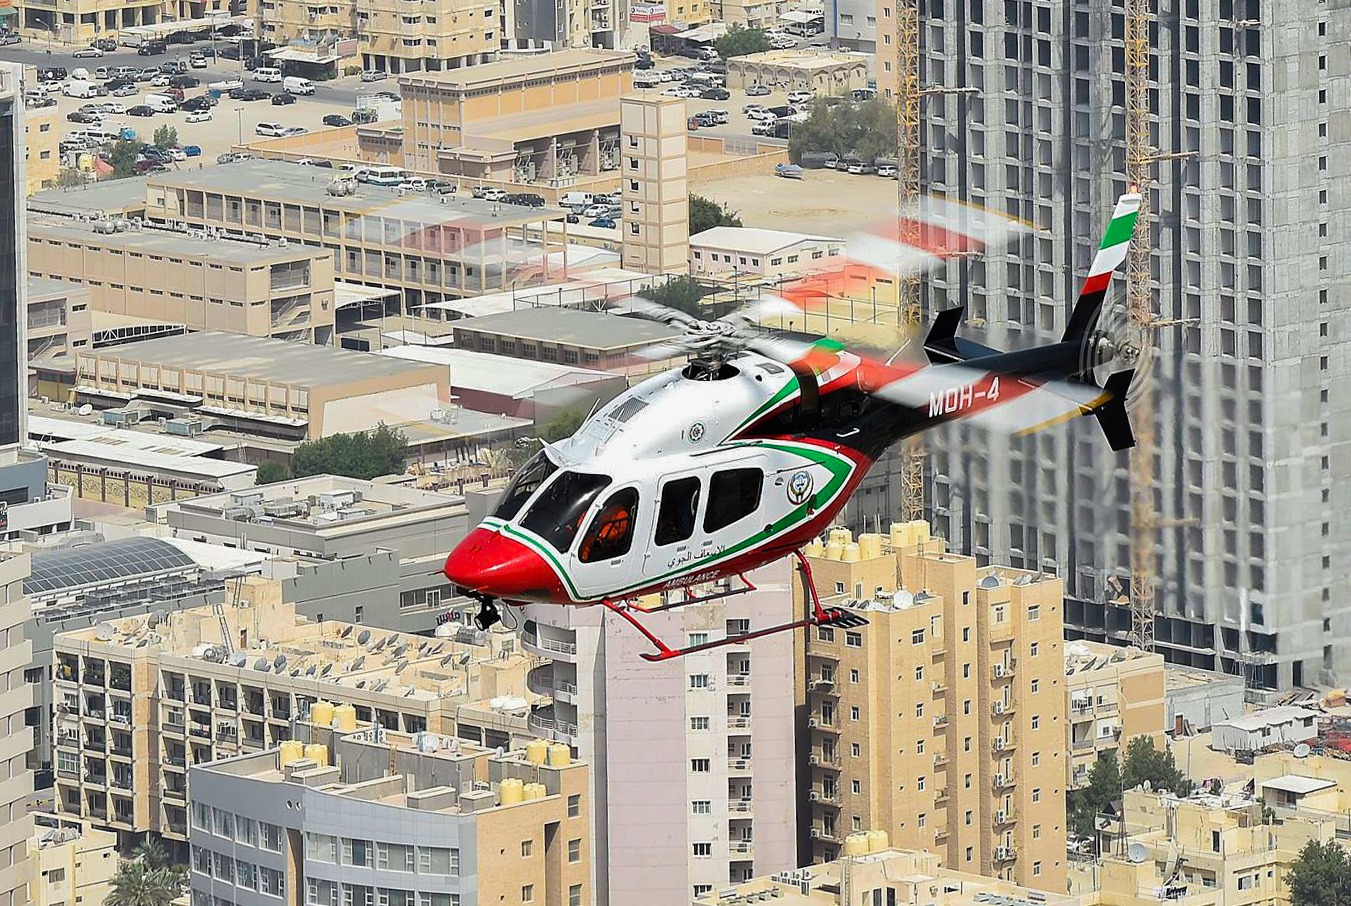 Helicopters reach areas faster than ambulances